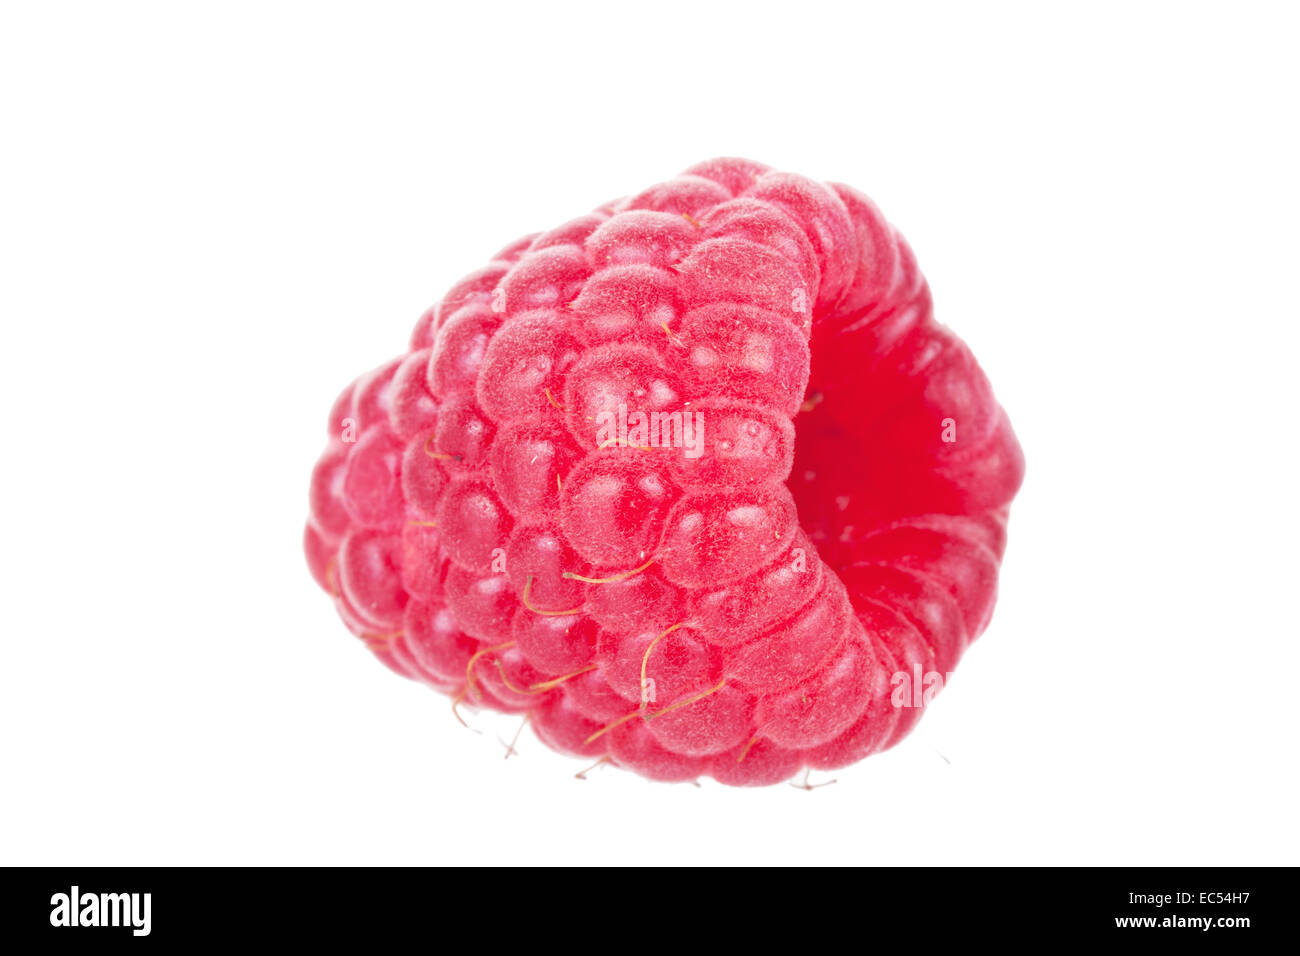 One berry of a raspberry on a white background, it is isolated Stock Photo